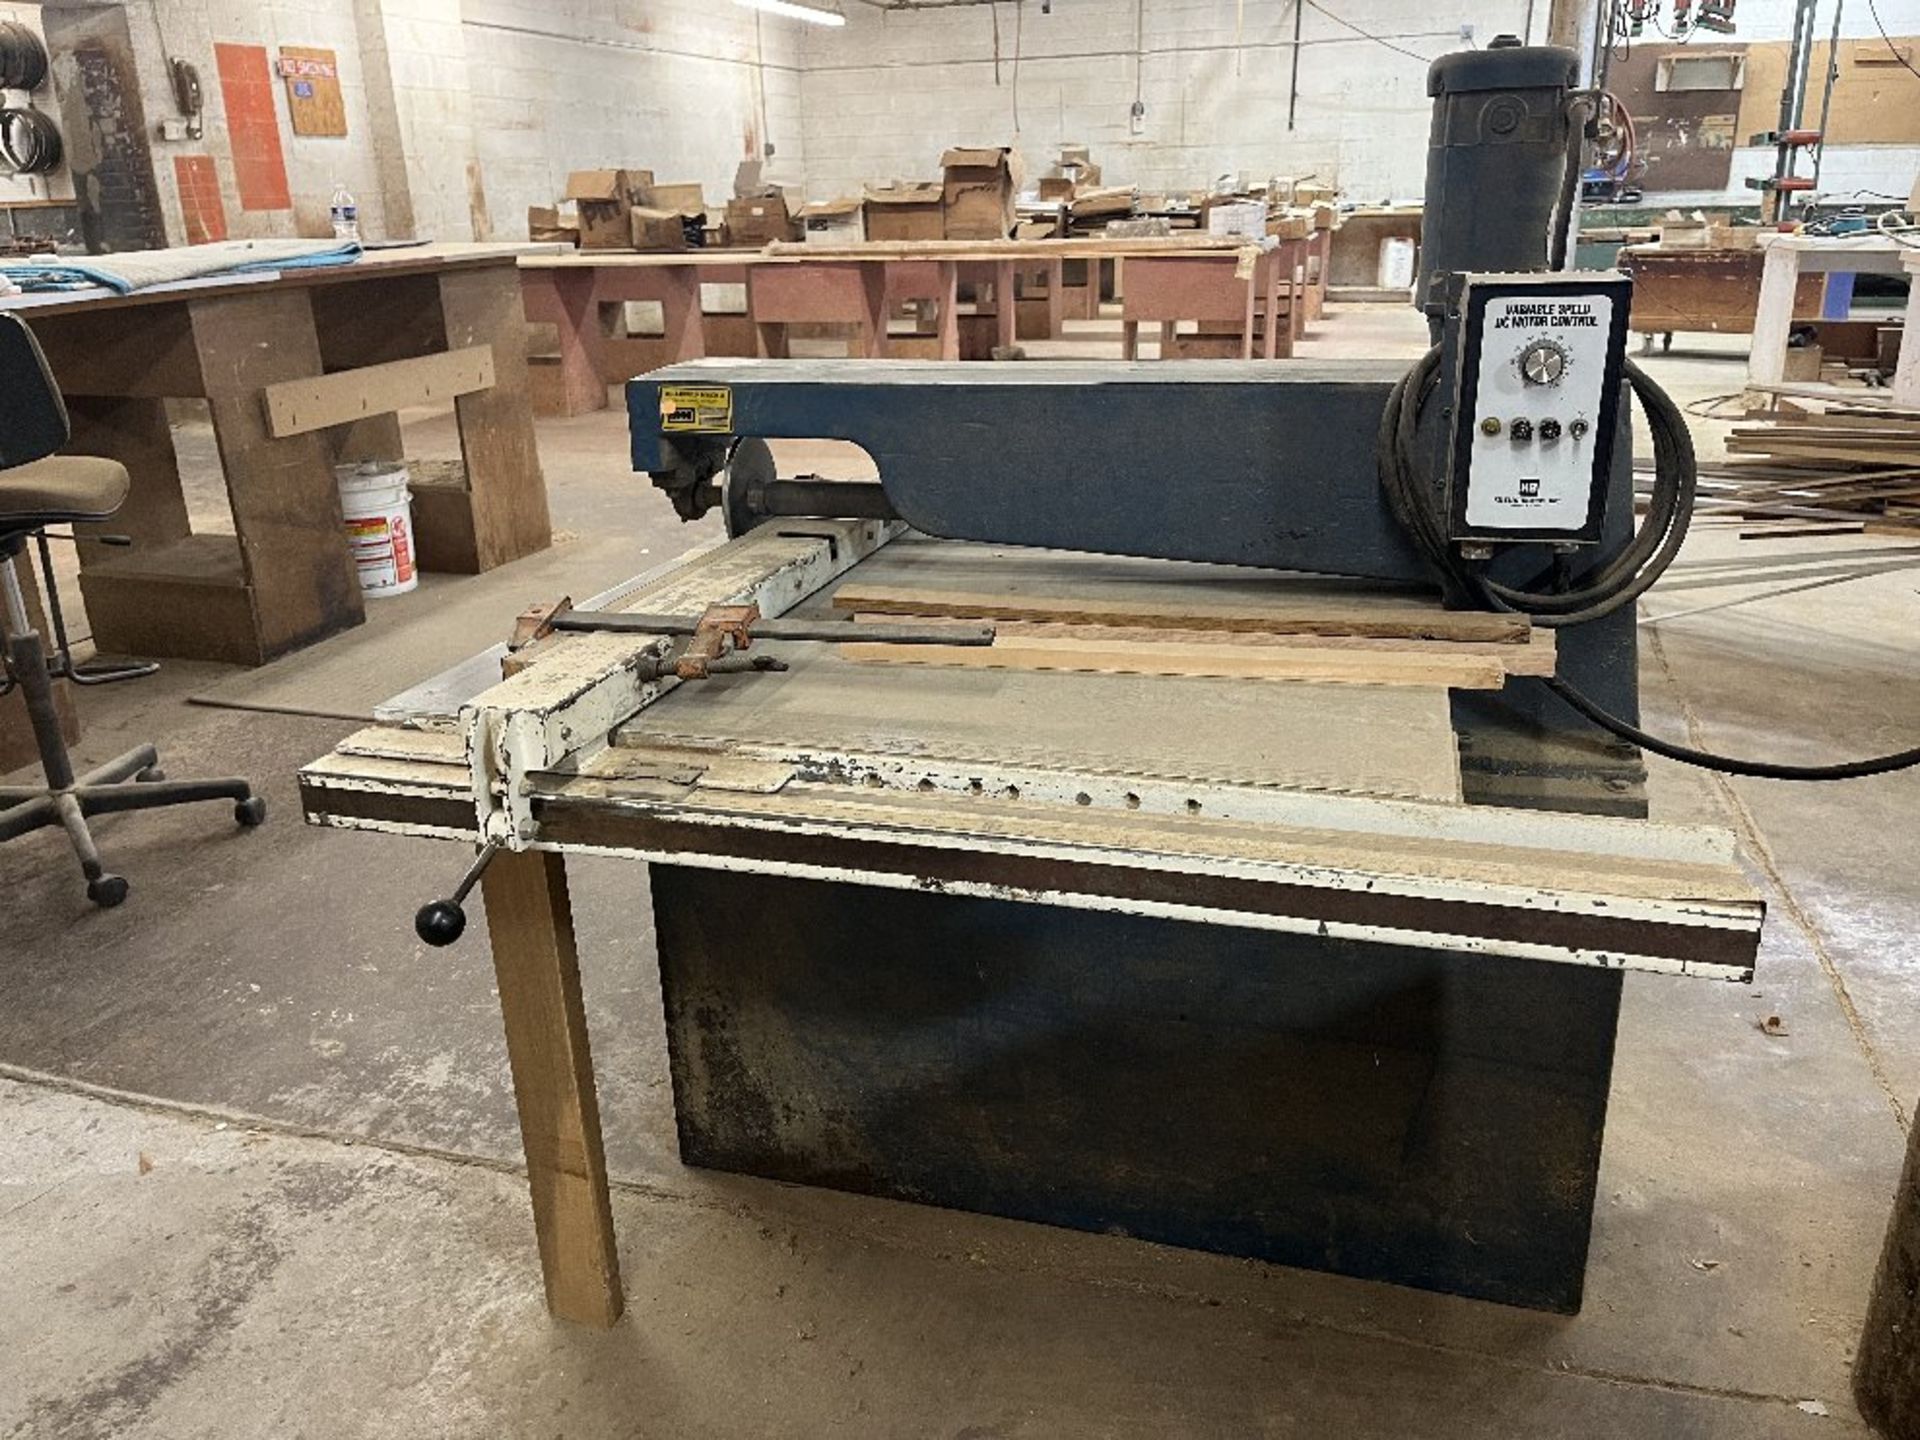 Miller Moorehead Machinery Plastic Slitter, Model 310, S/N 1578, 30" Wide Capacity, with Base